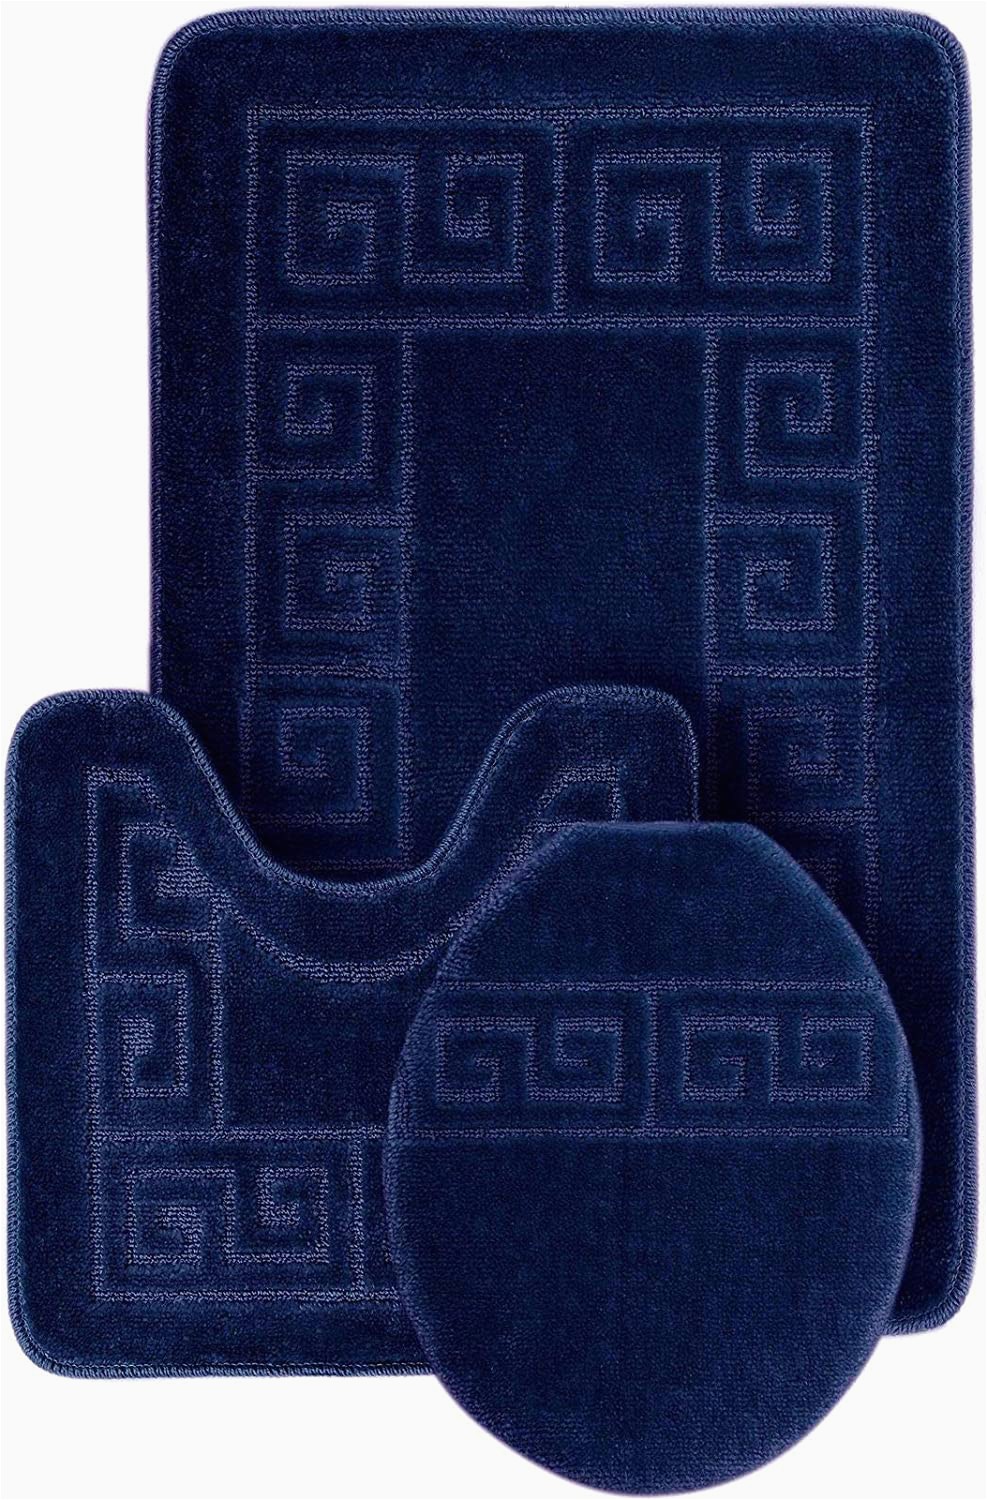 Bathroom Rug Sets Big Lots Wpm World Products Mart Bathroom Rugs Set 3 Piece Bath Pattern Rug 20"x32" Contour Mats 20"x20" with Lid Cover Navy